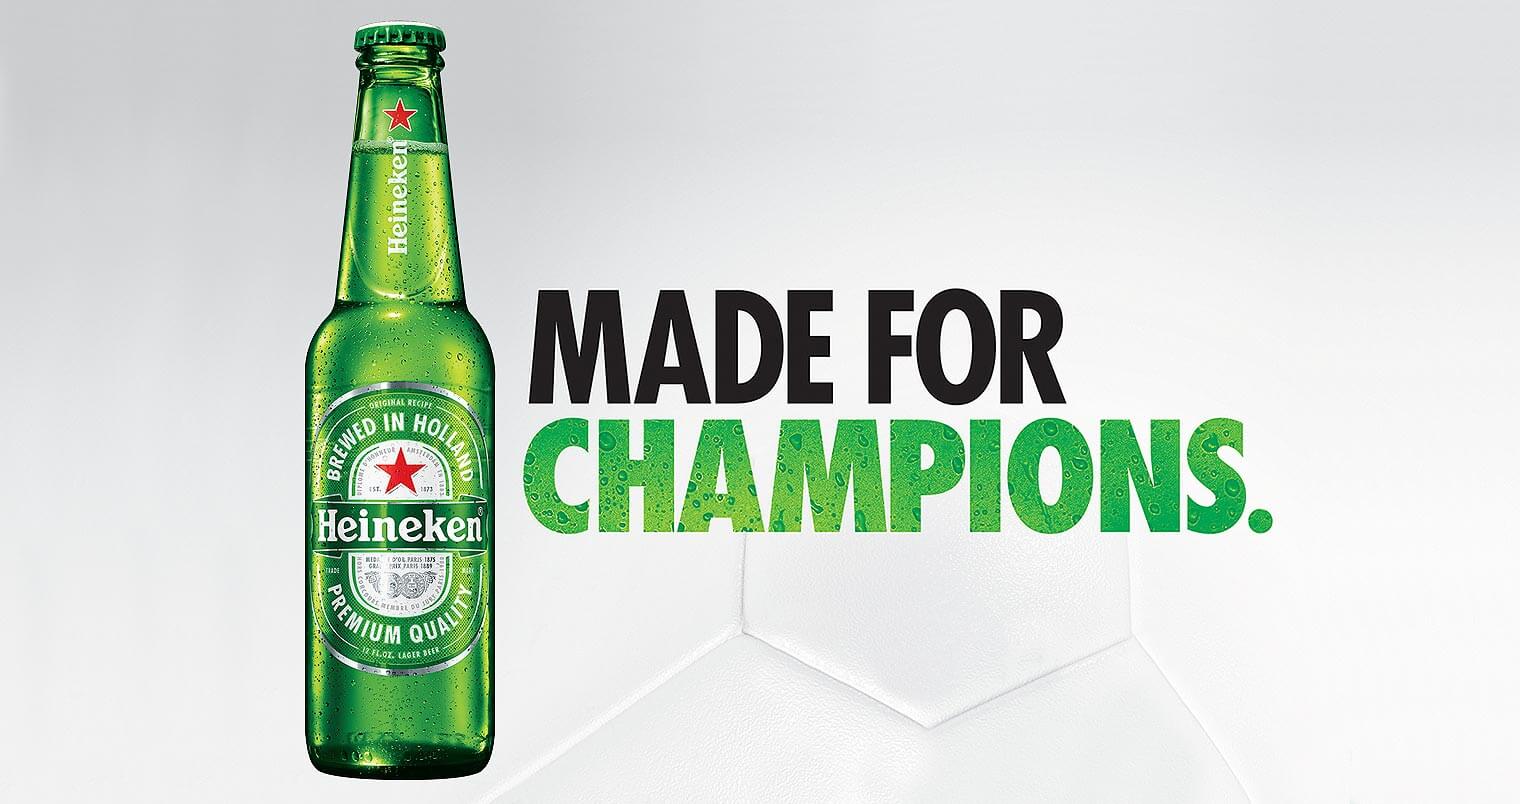 Heineken and the ICC, bottle and made for champrions message, featured image